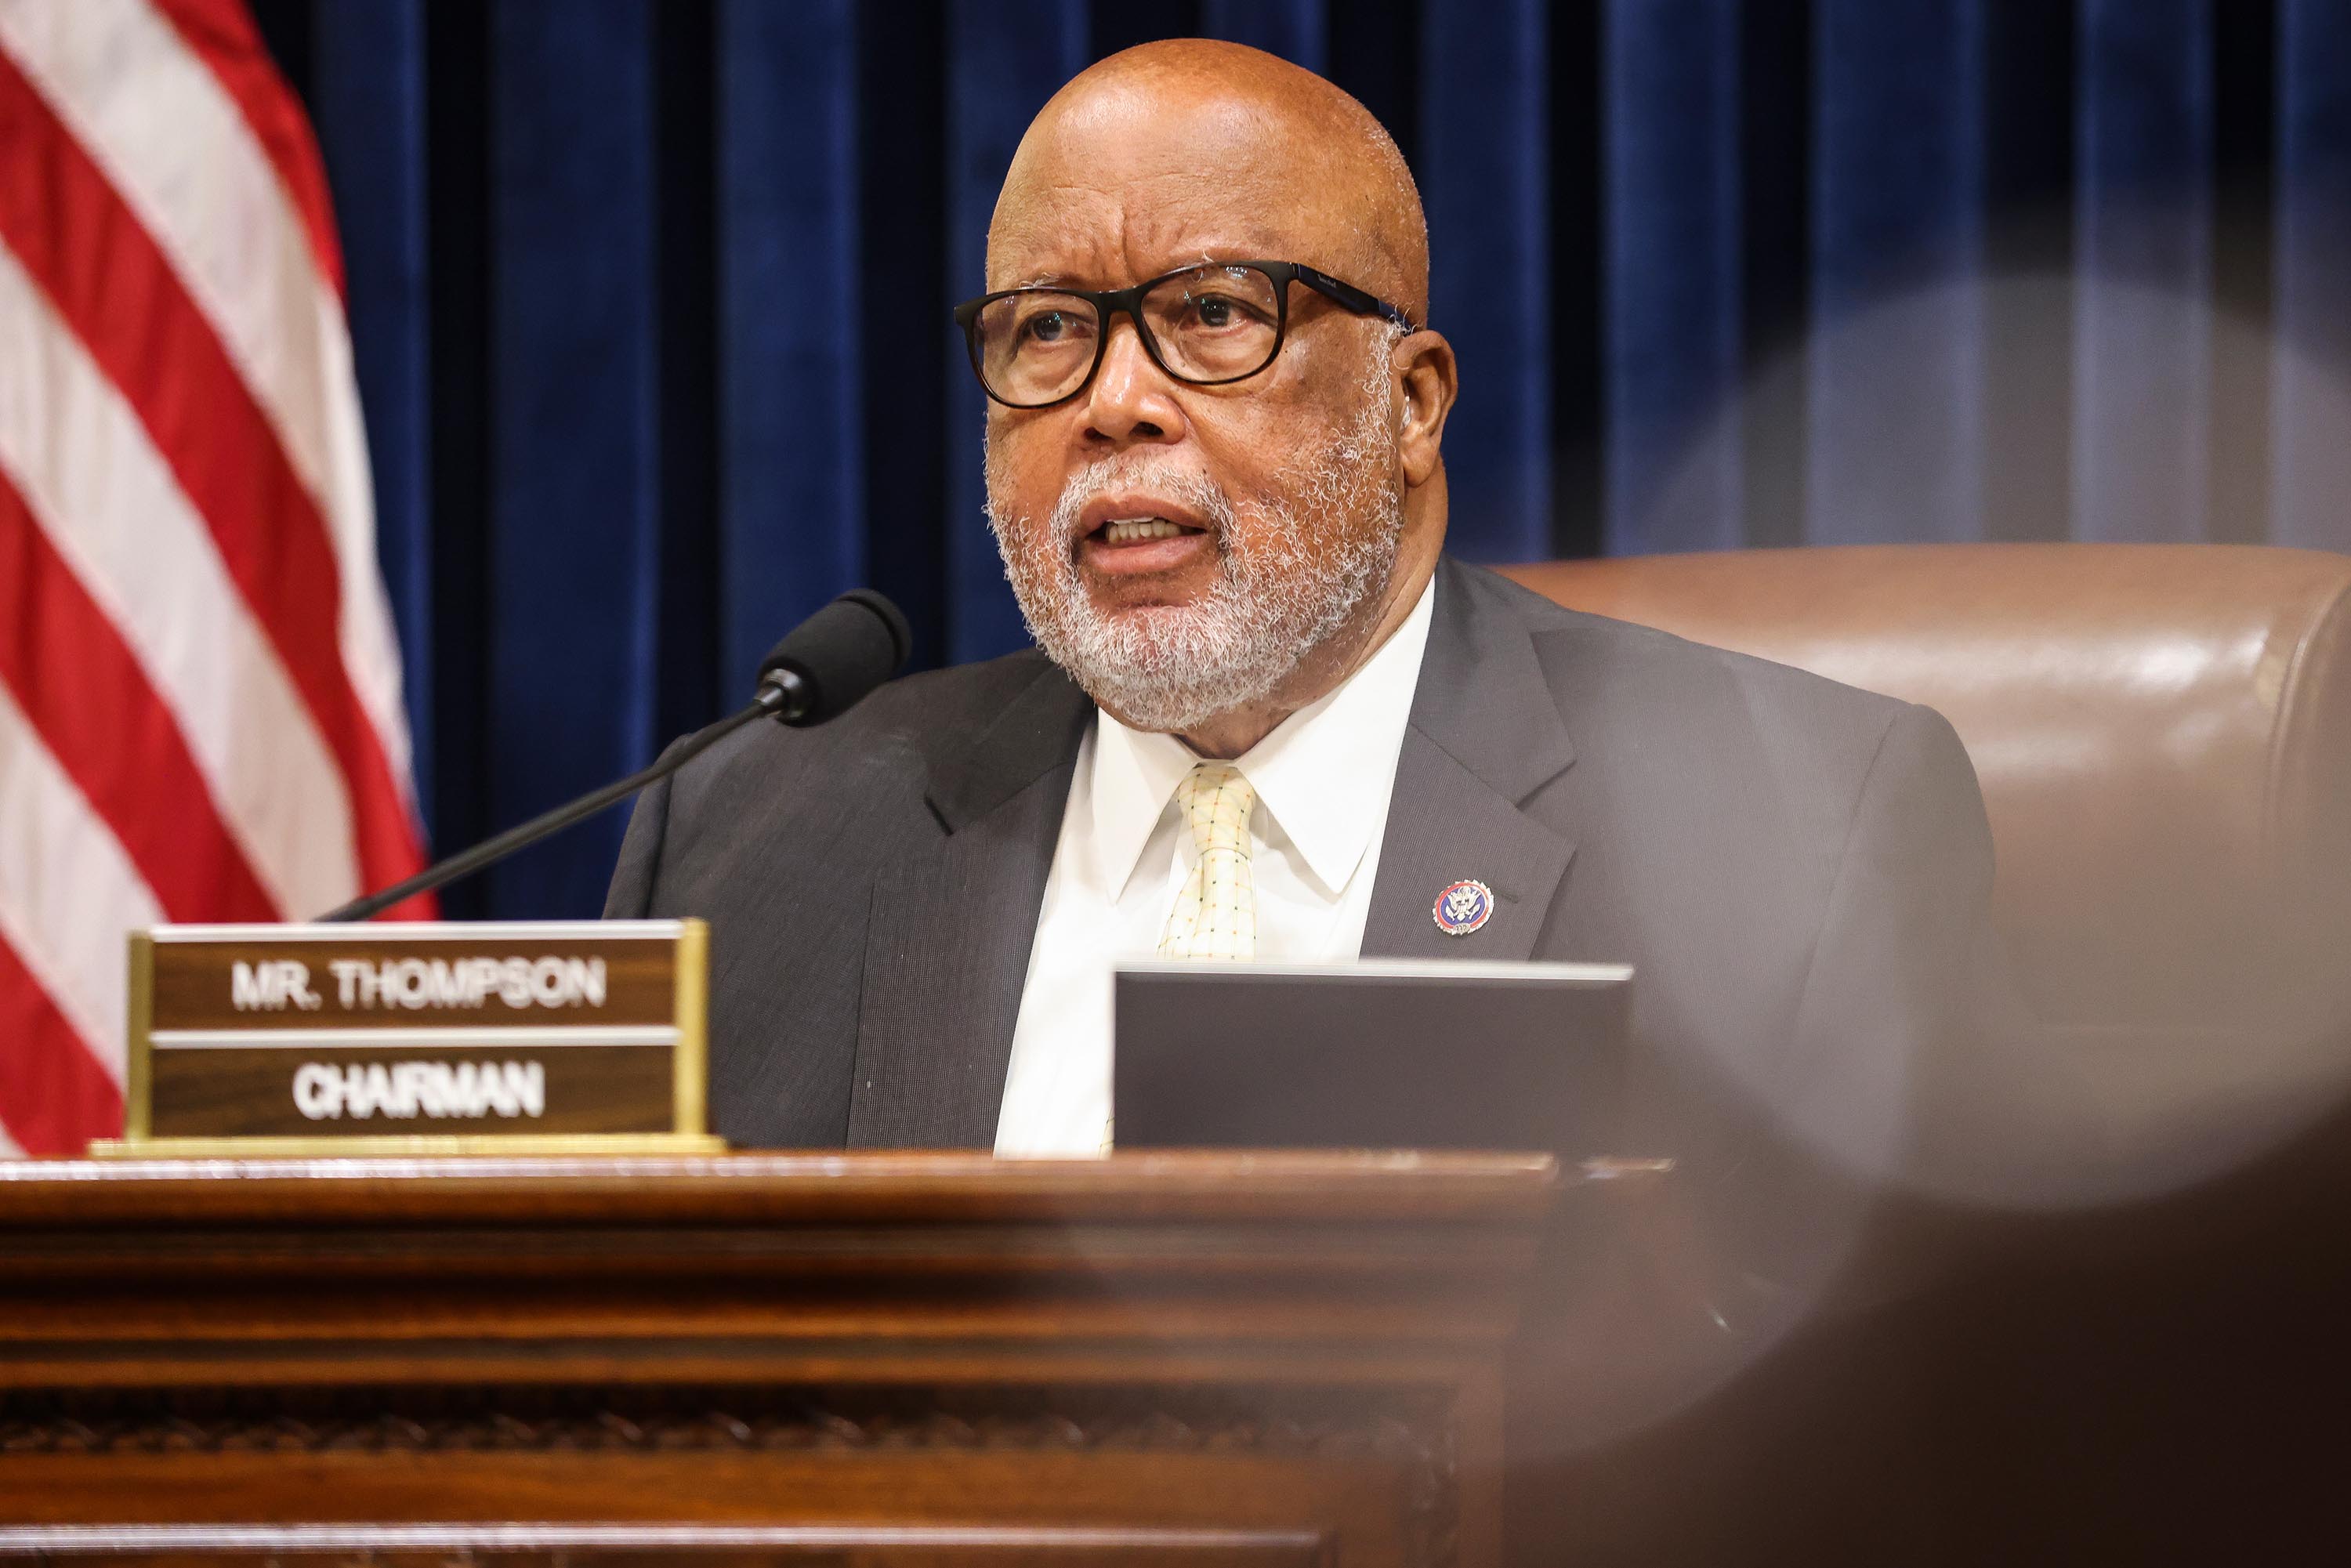 Chairman Rep. Bennie Thompson, D-MS, speaks during a hearing by the House Select Committee investigating the January 6 attack on the U.S. Capitol on July 27, 2021.